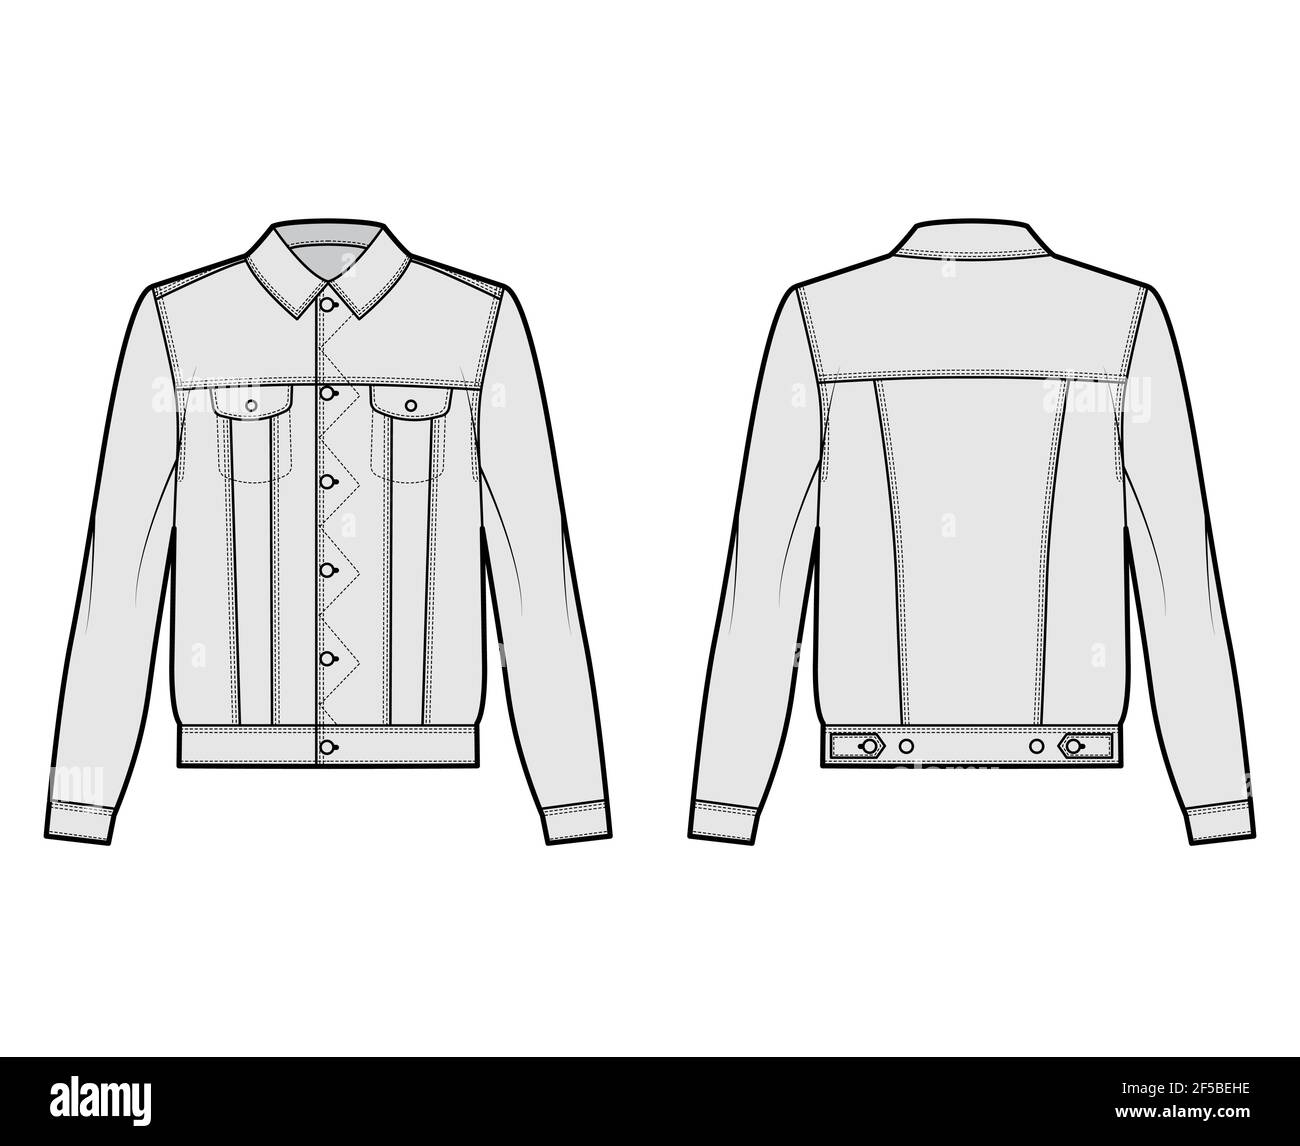 Faded jeans jacket Stock Vector Images - Alamy